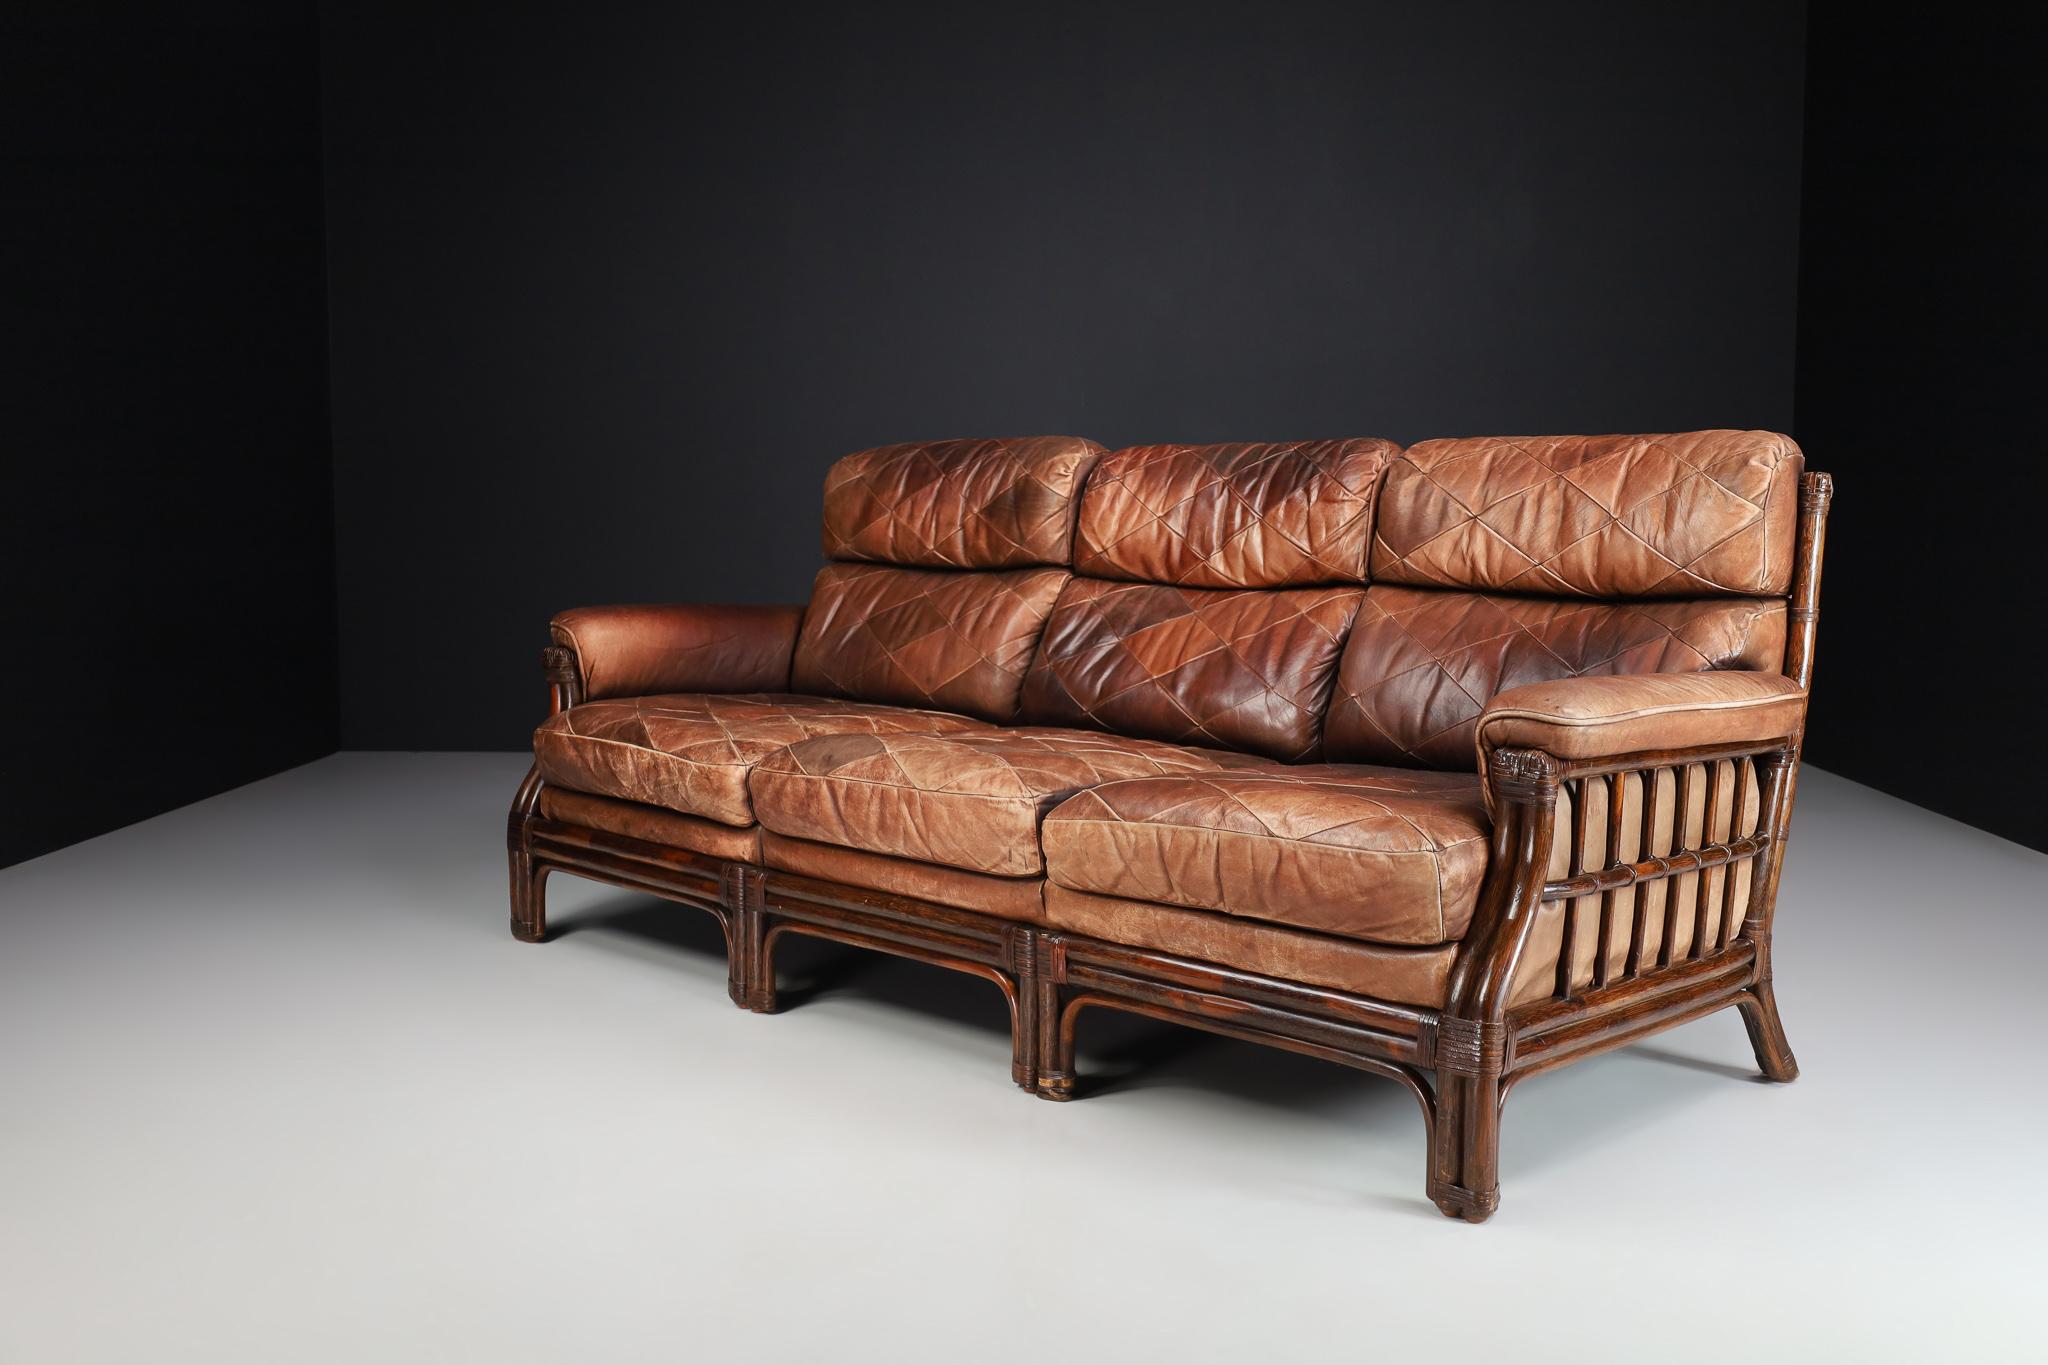 Mid-Century Modern bamboo and leather sofa, France 1970s.

This French sofa was made of bamboo and leather in France in 1970. And would be an eye-catching addition to any interior, such as a large living room, screening room, or office. It also